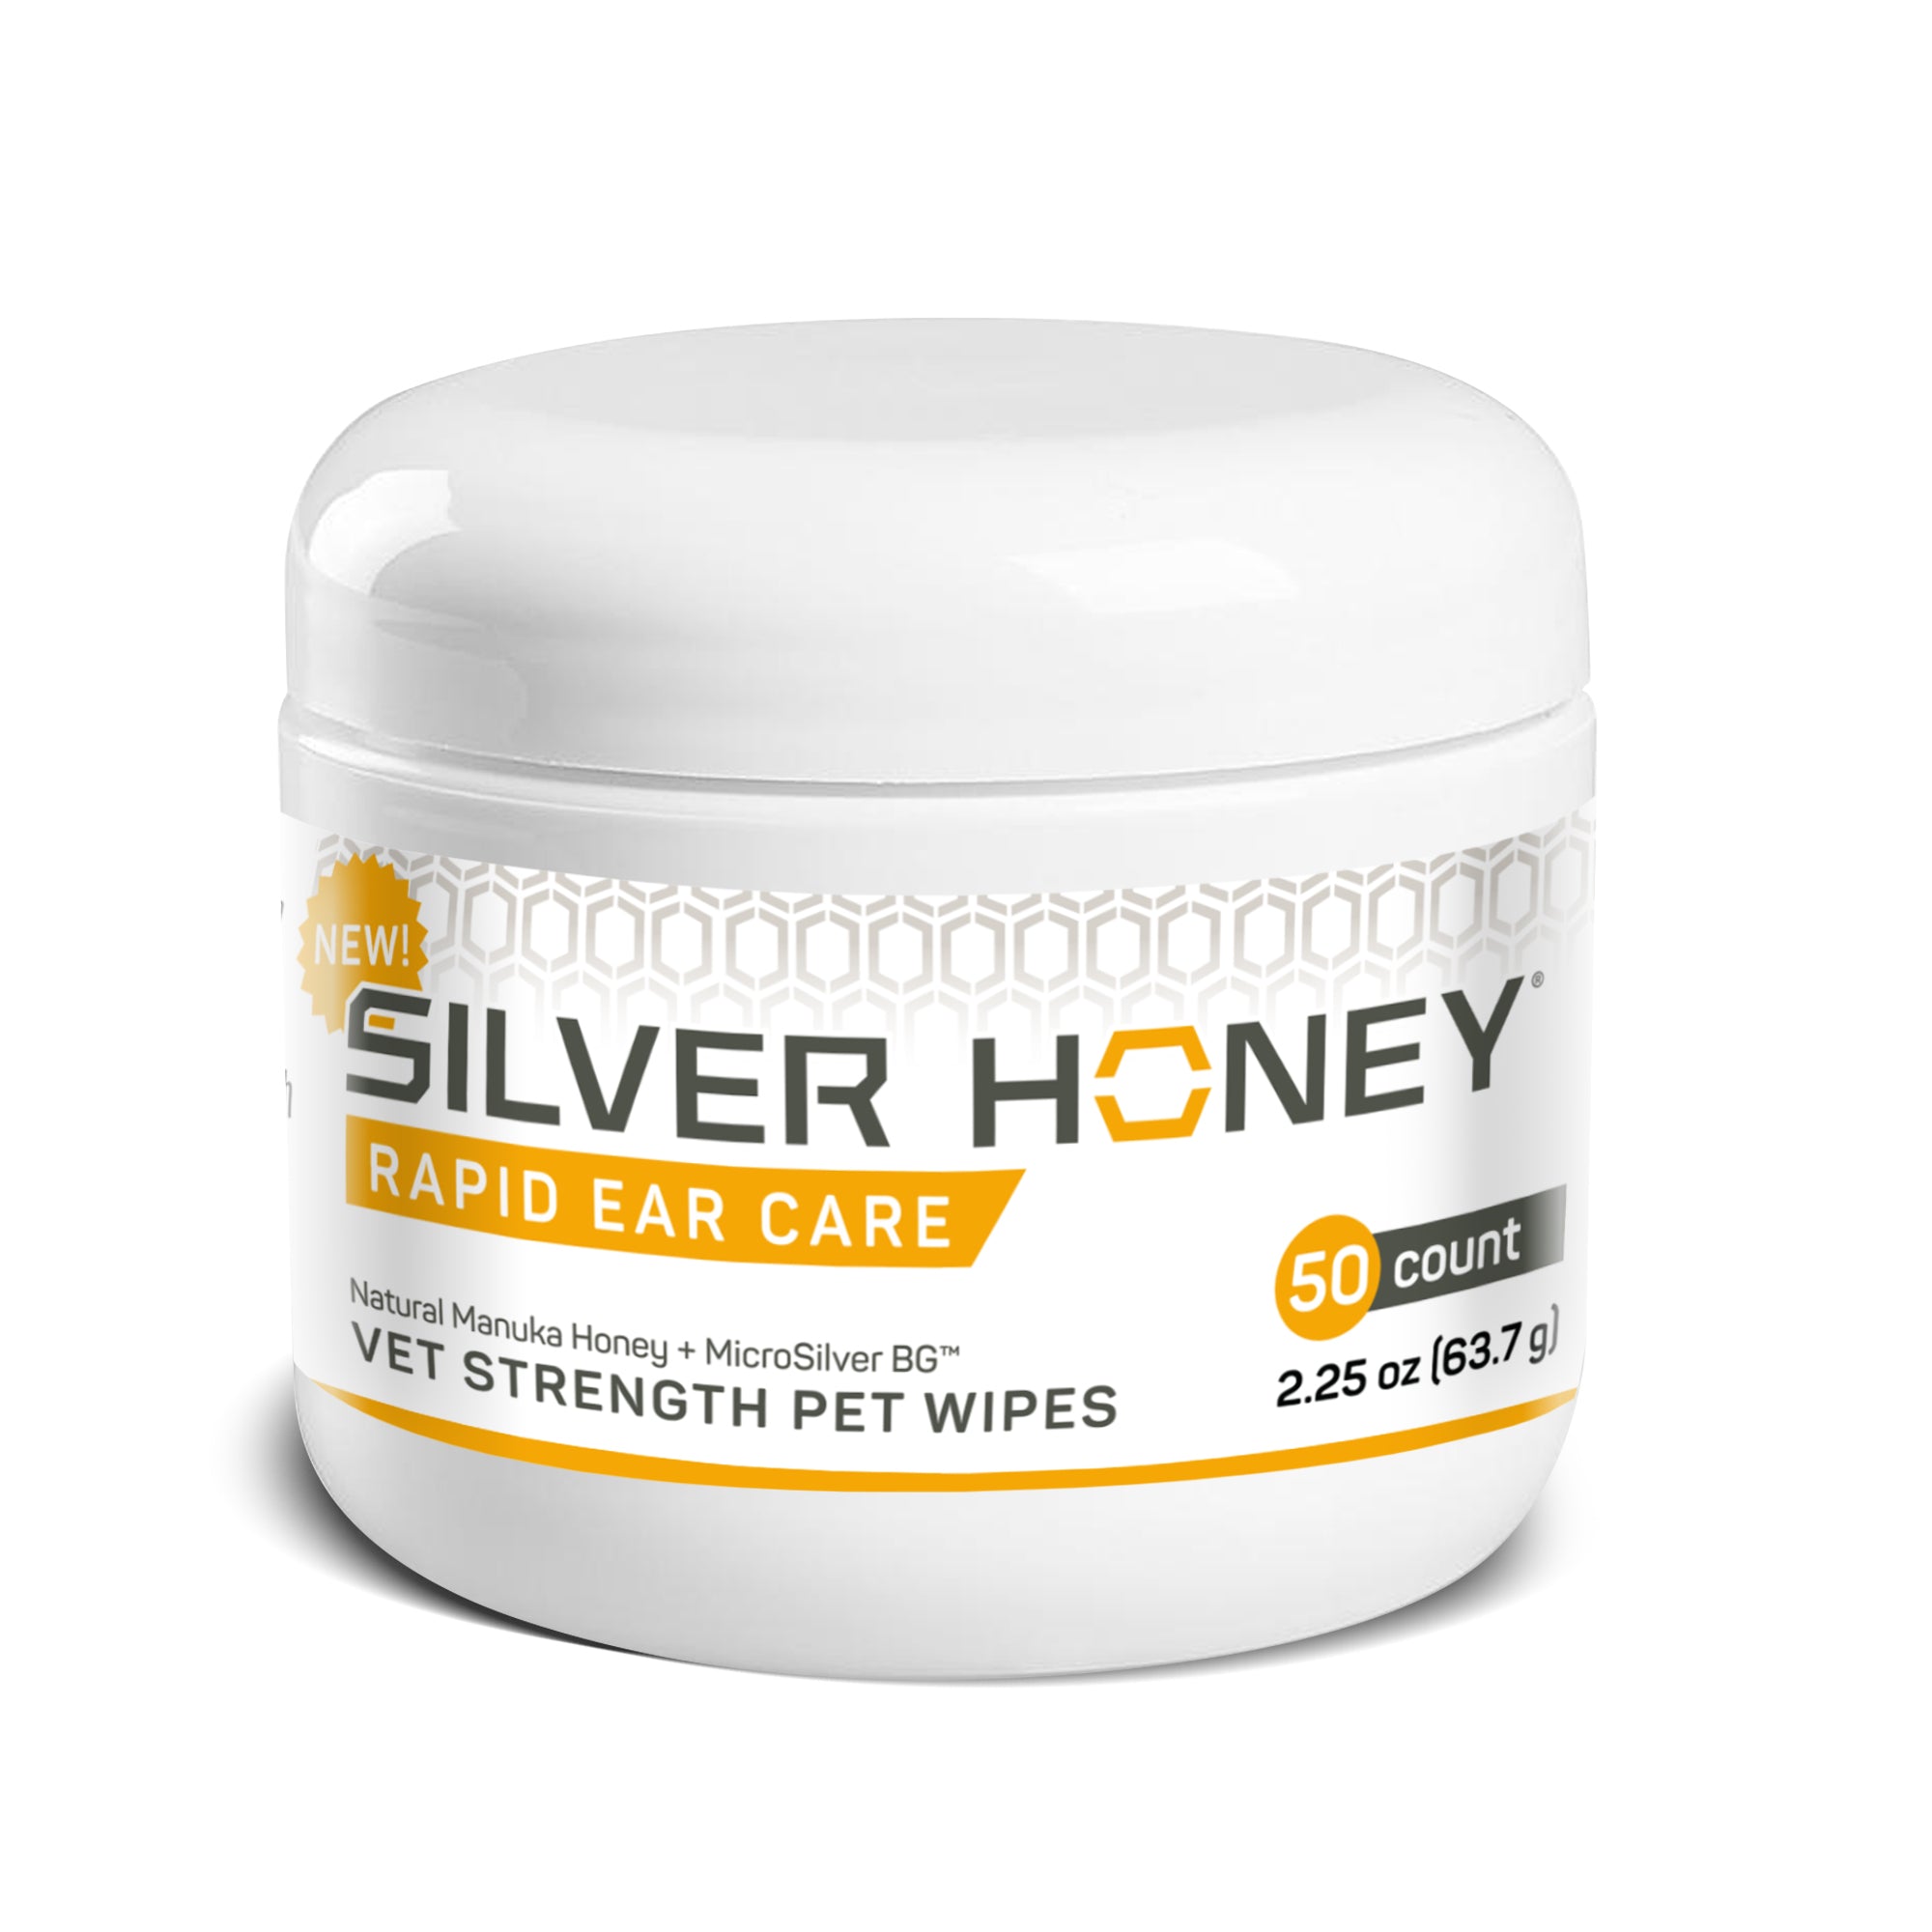 Silver Honey cat ear cleaners wipes